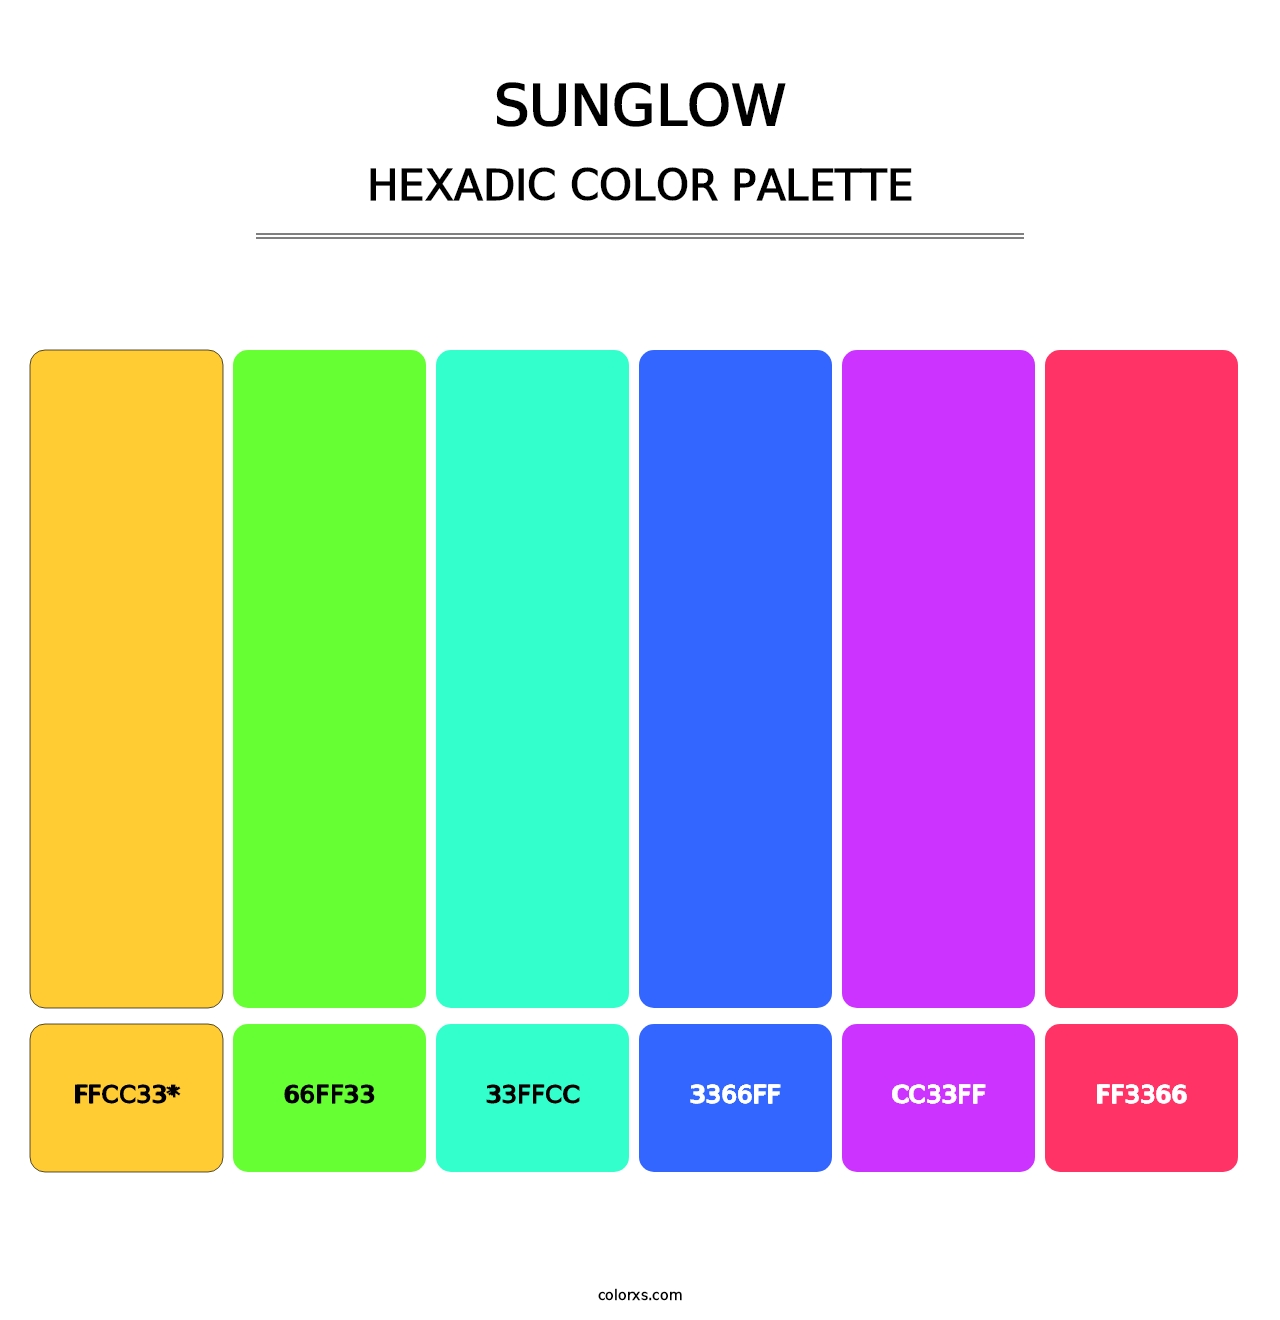 Sunglow - Hexadic Color Palette